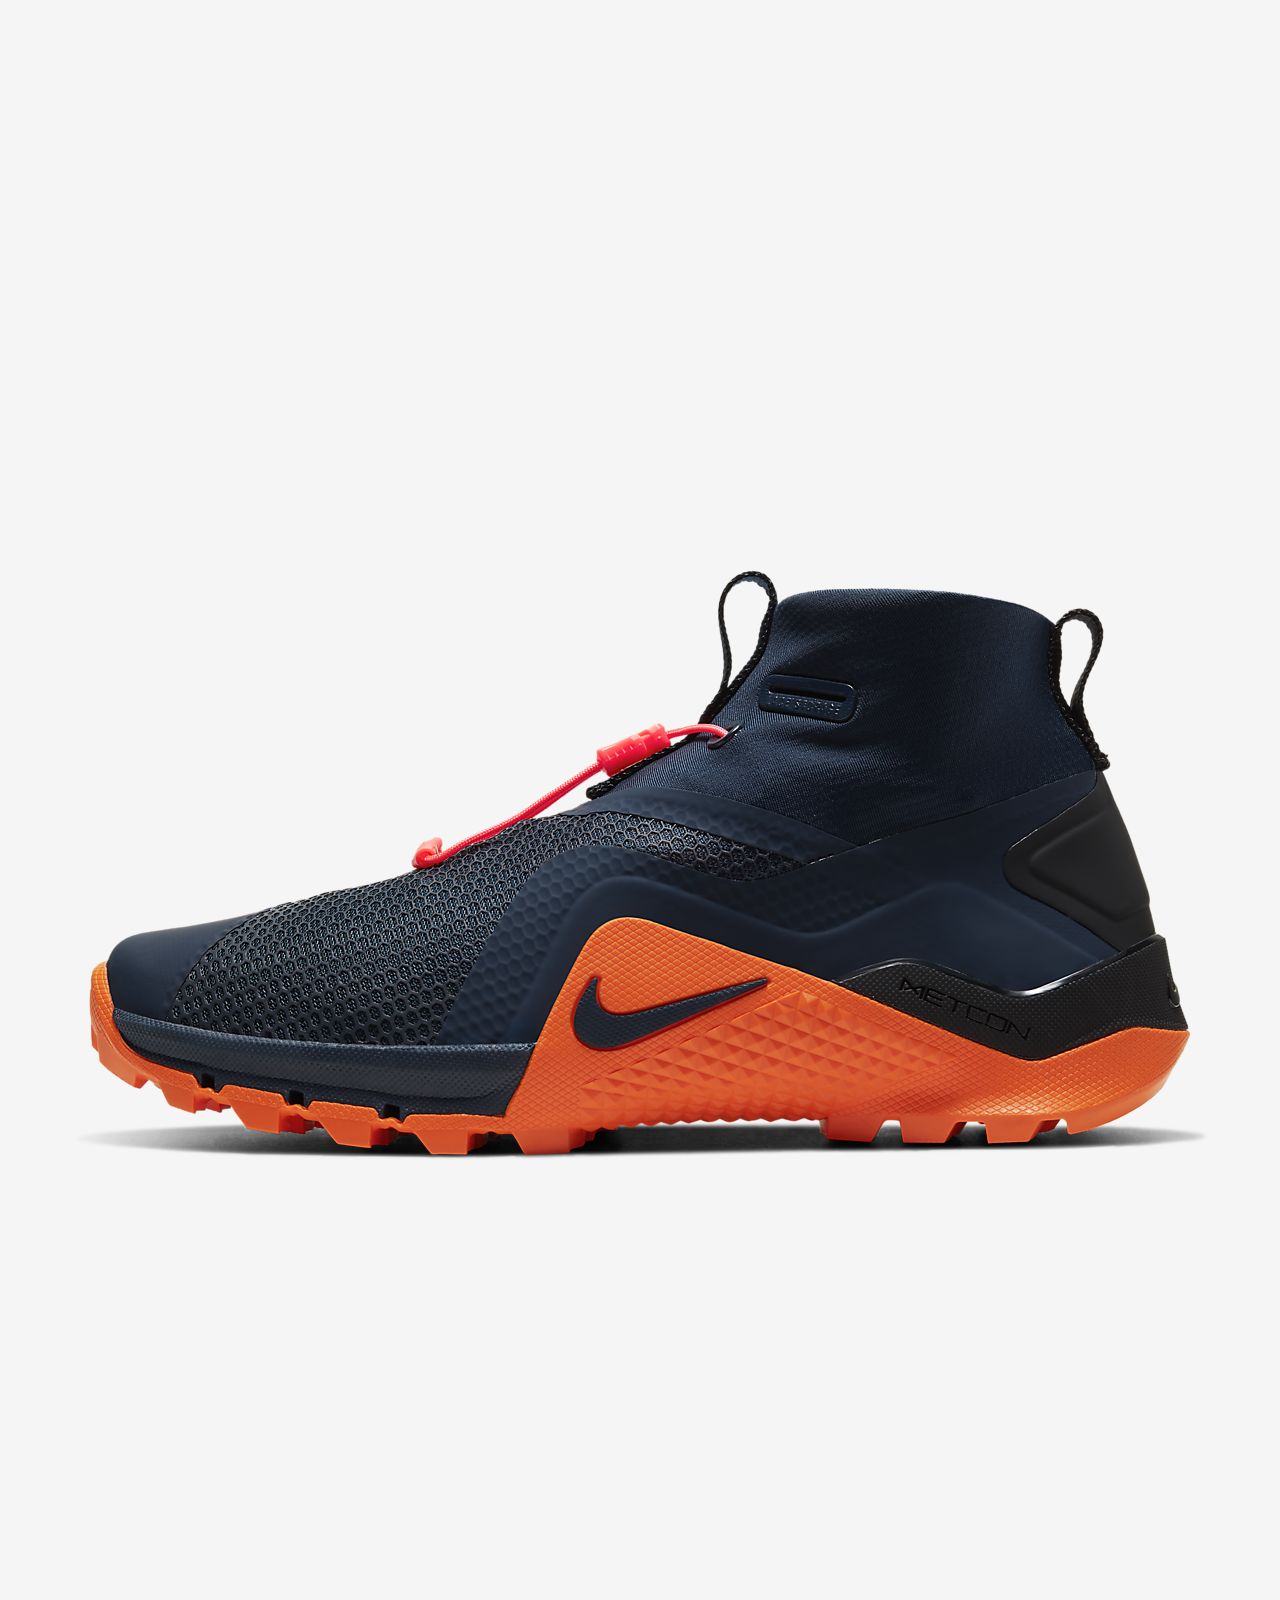 Nike.com Top Sellers, UP TO 59% OFF | www.encuentroguionistas.com